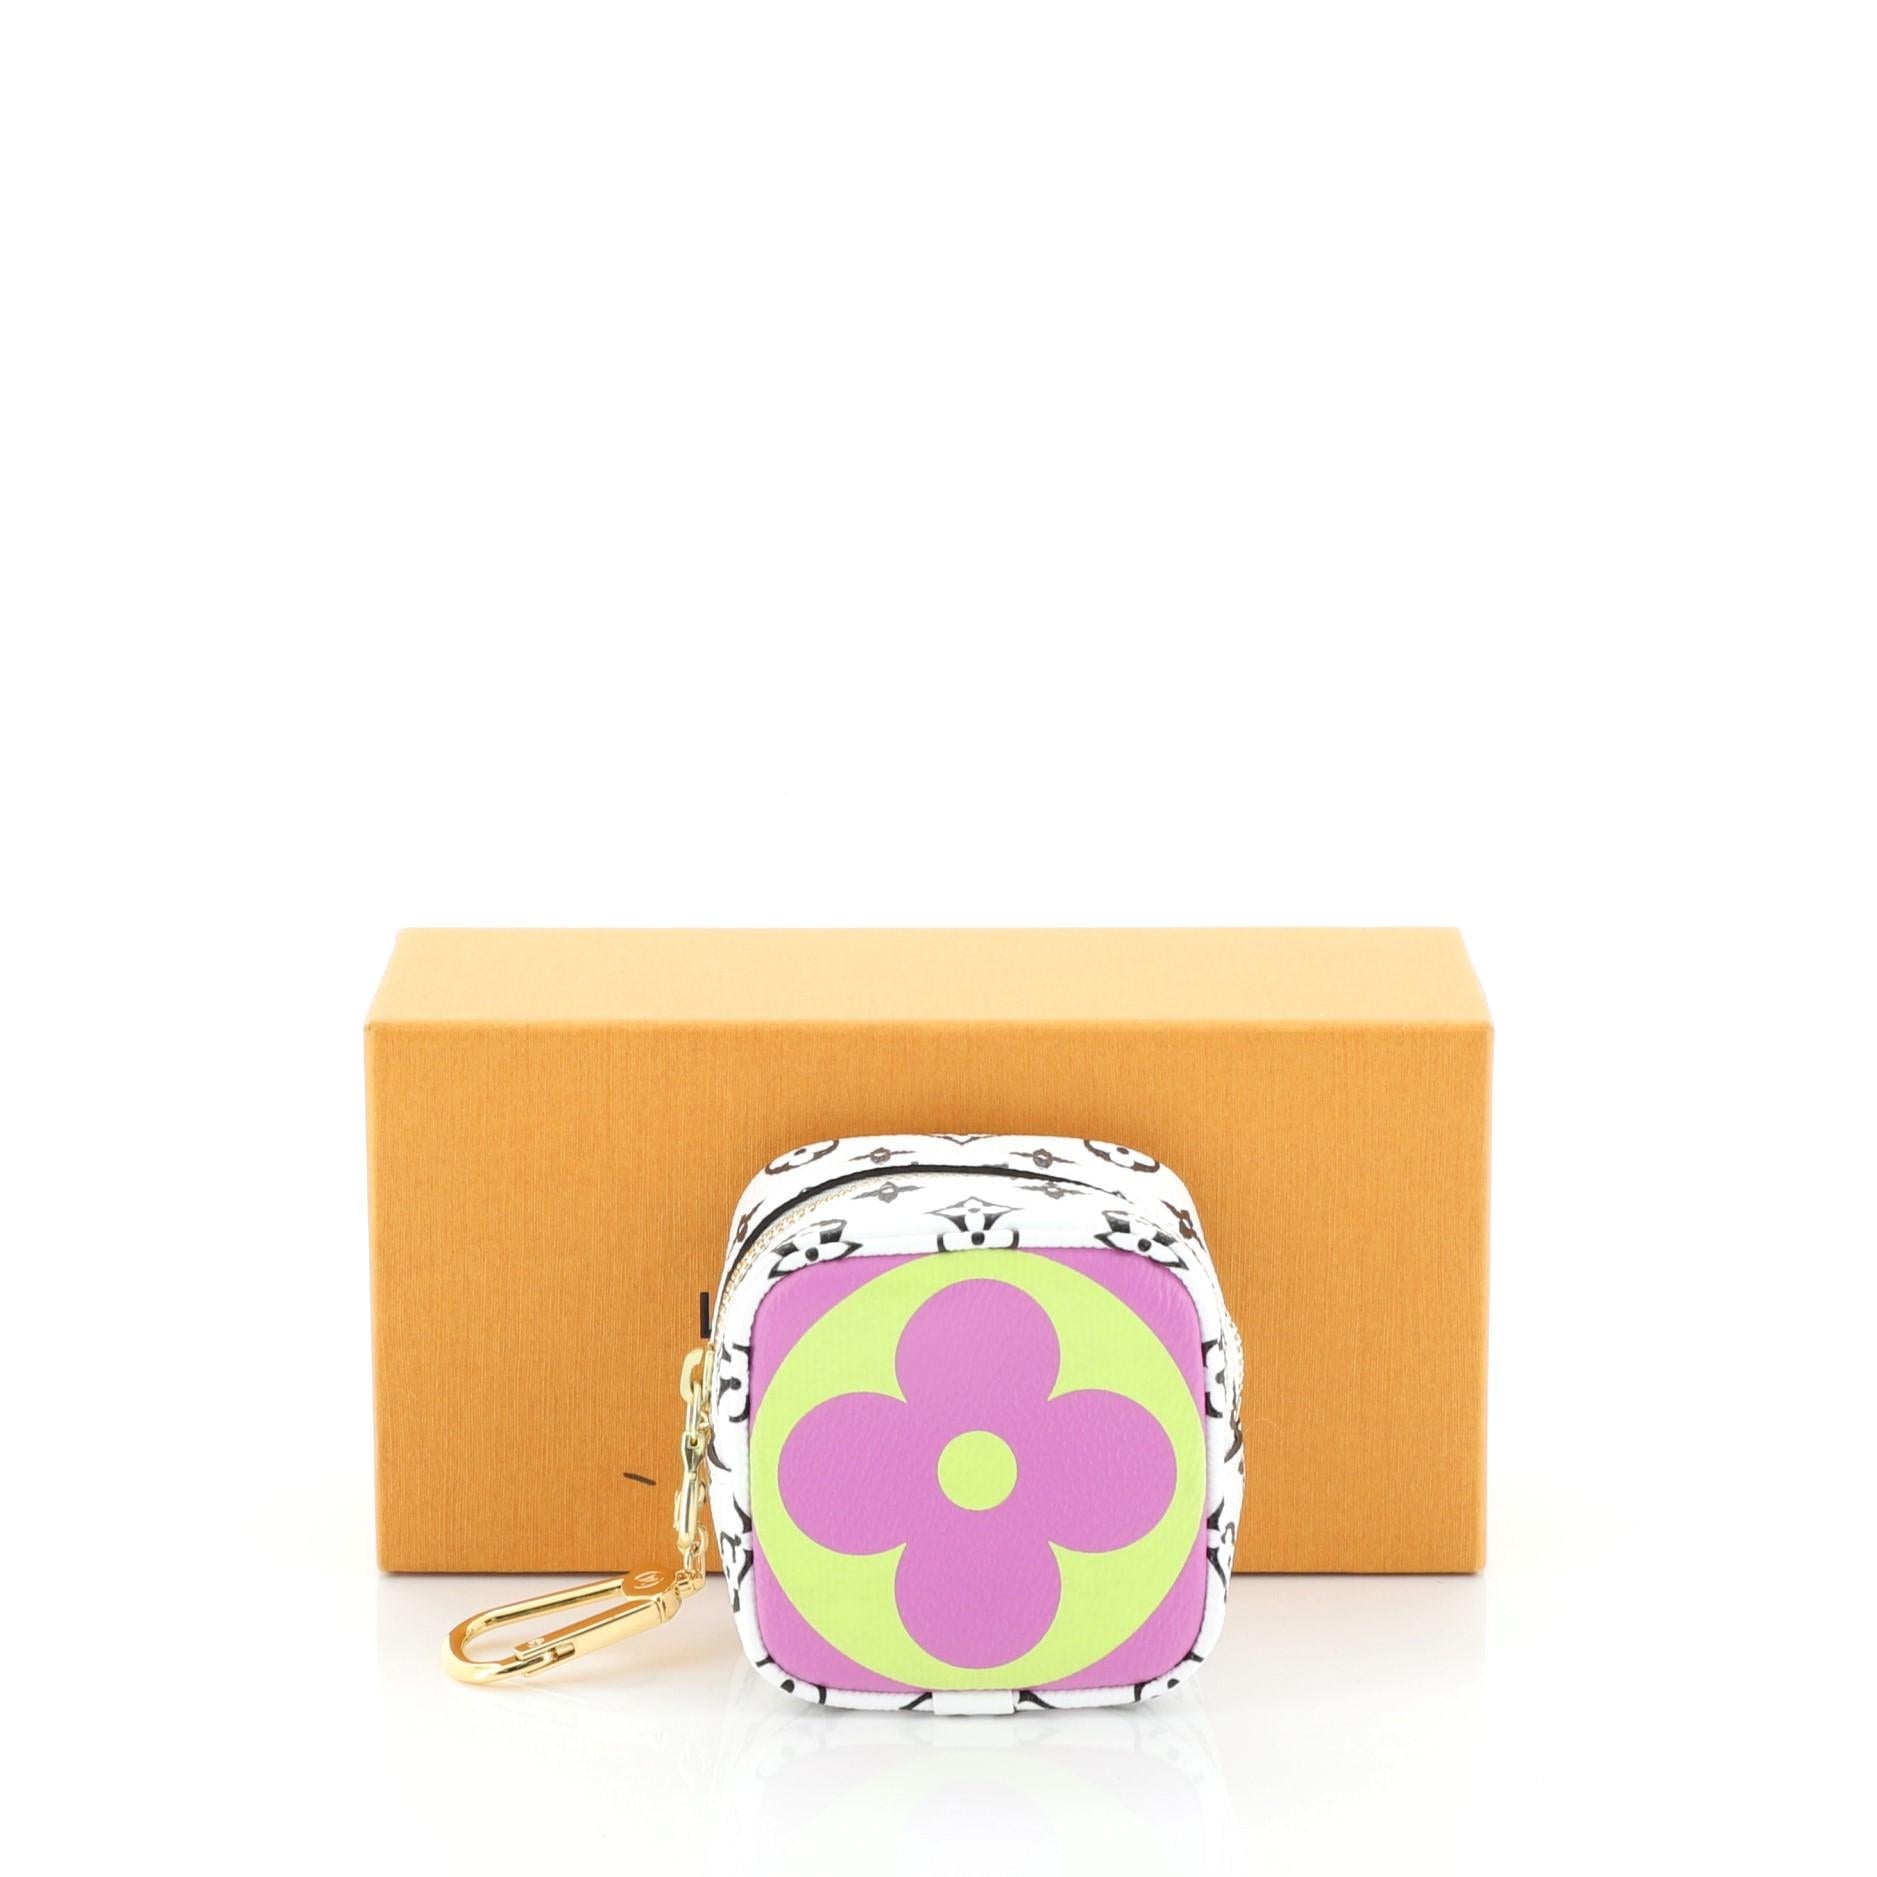 
This Louis Vuitton Cube Coin Purse Limited Edition Colored Monogram Giant, crafted in white and multicolor monogram coated canvas, features hook on a chain accent and gold-tone hardware. Its zip closure opens to a green microfiber interior.